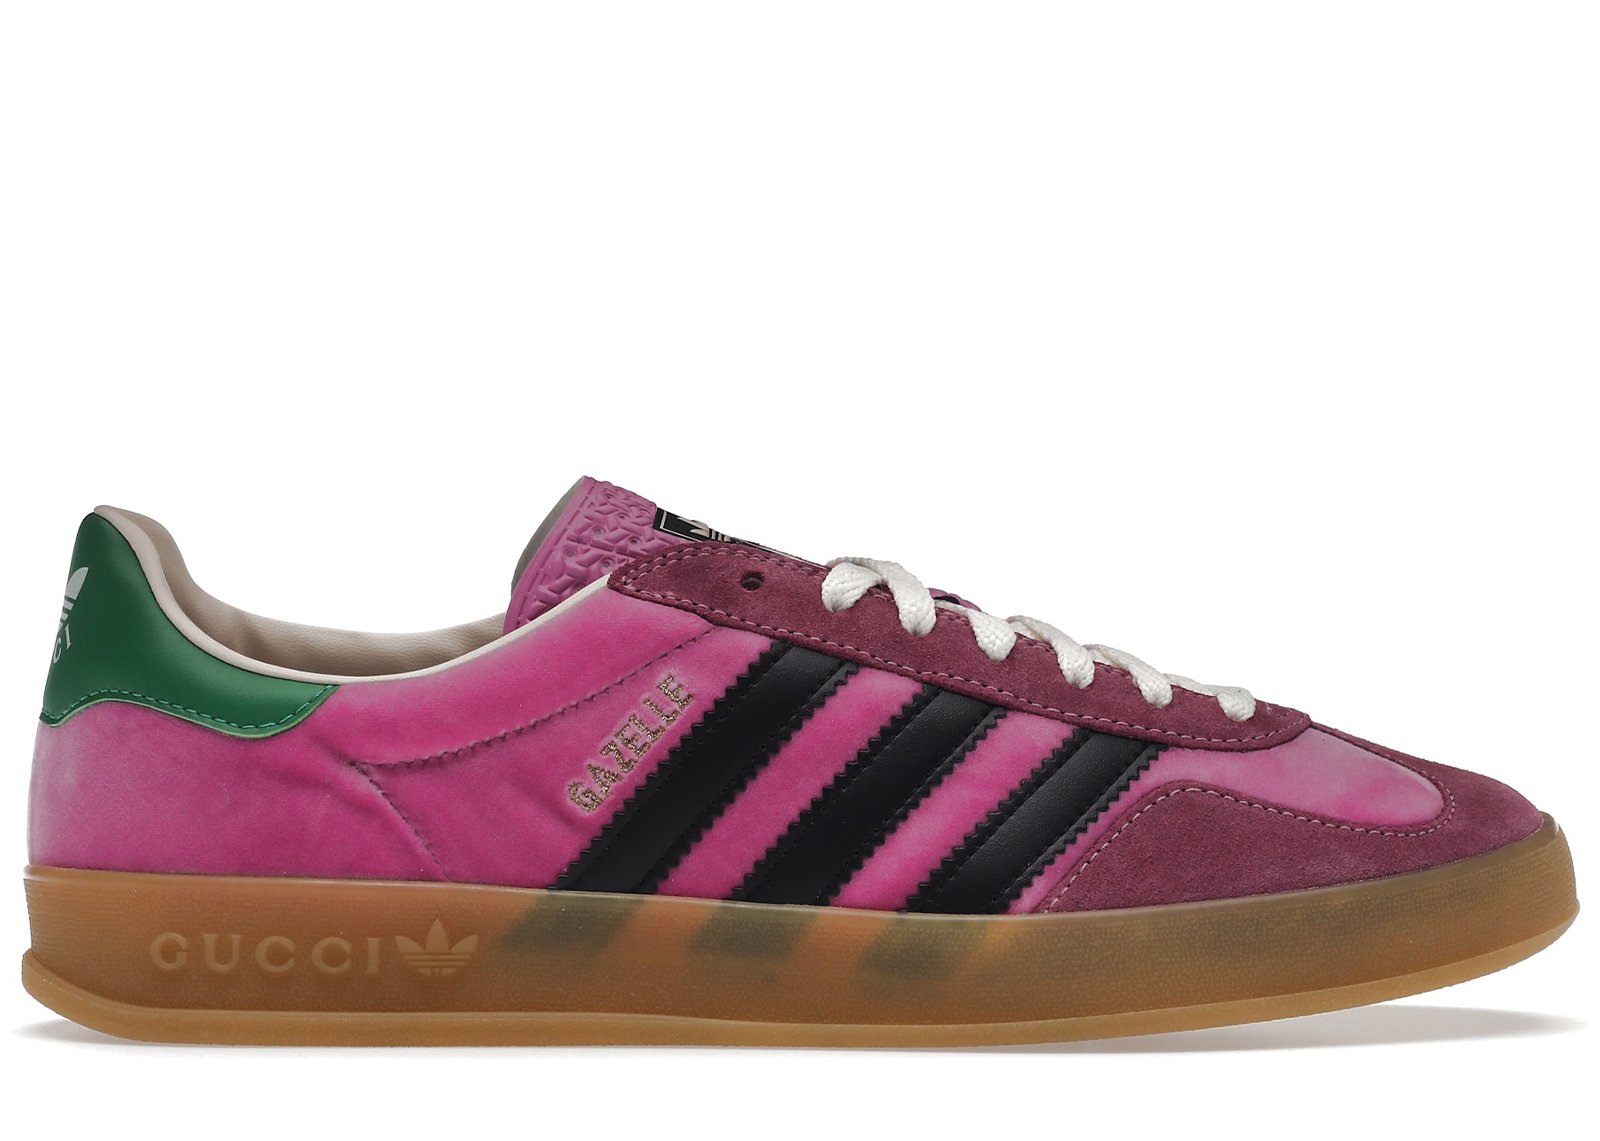 sneakers adidas x Gucci Gazelle Pink